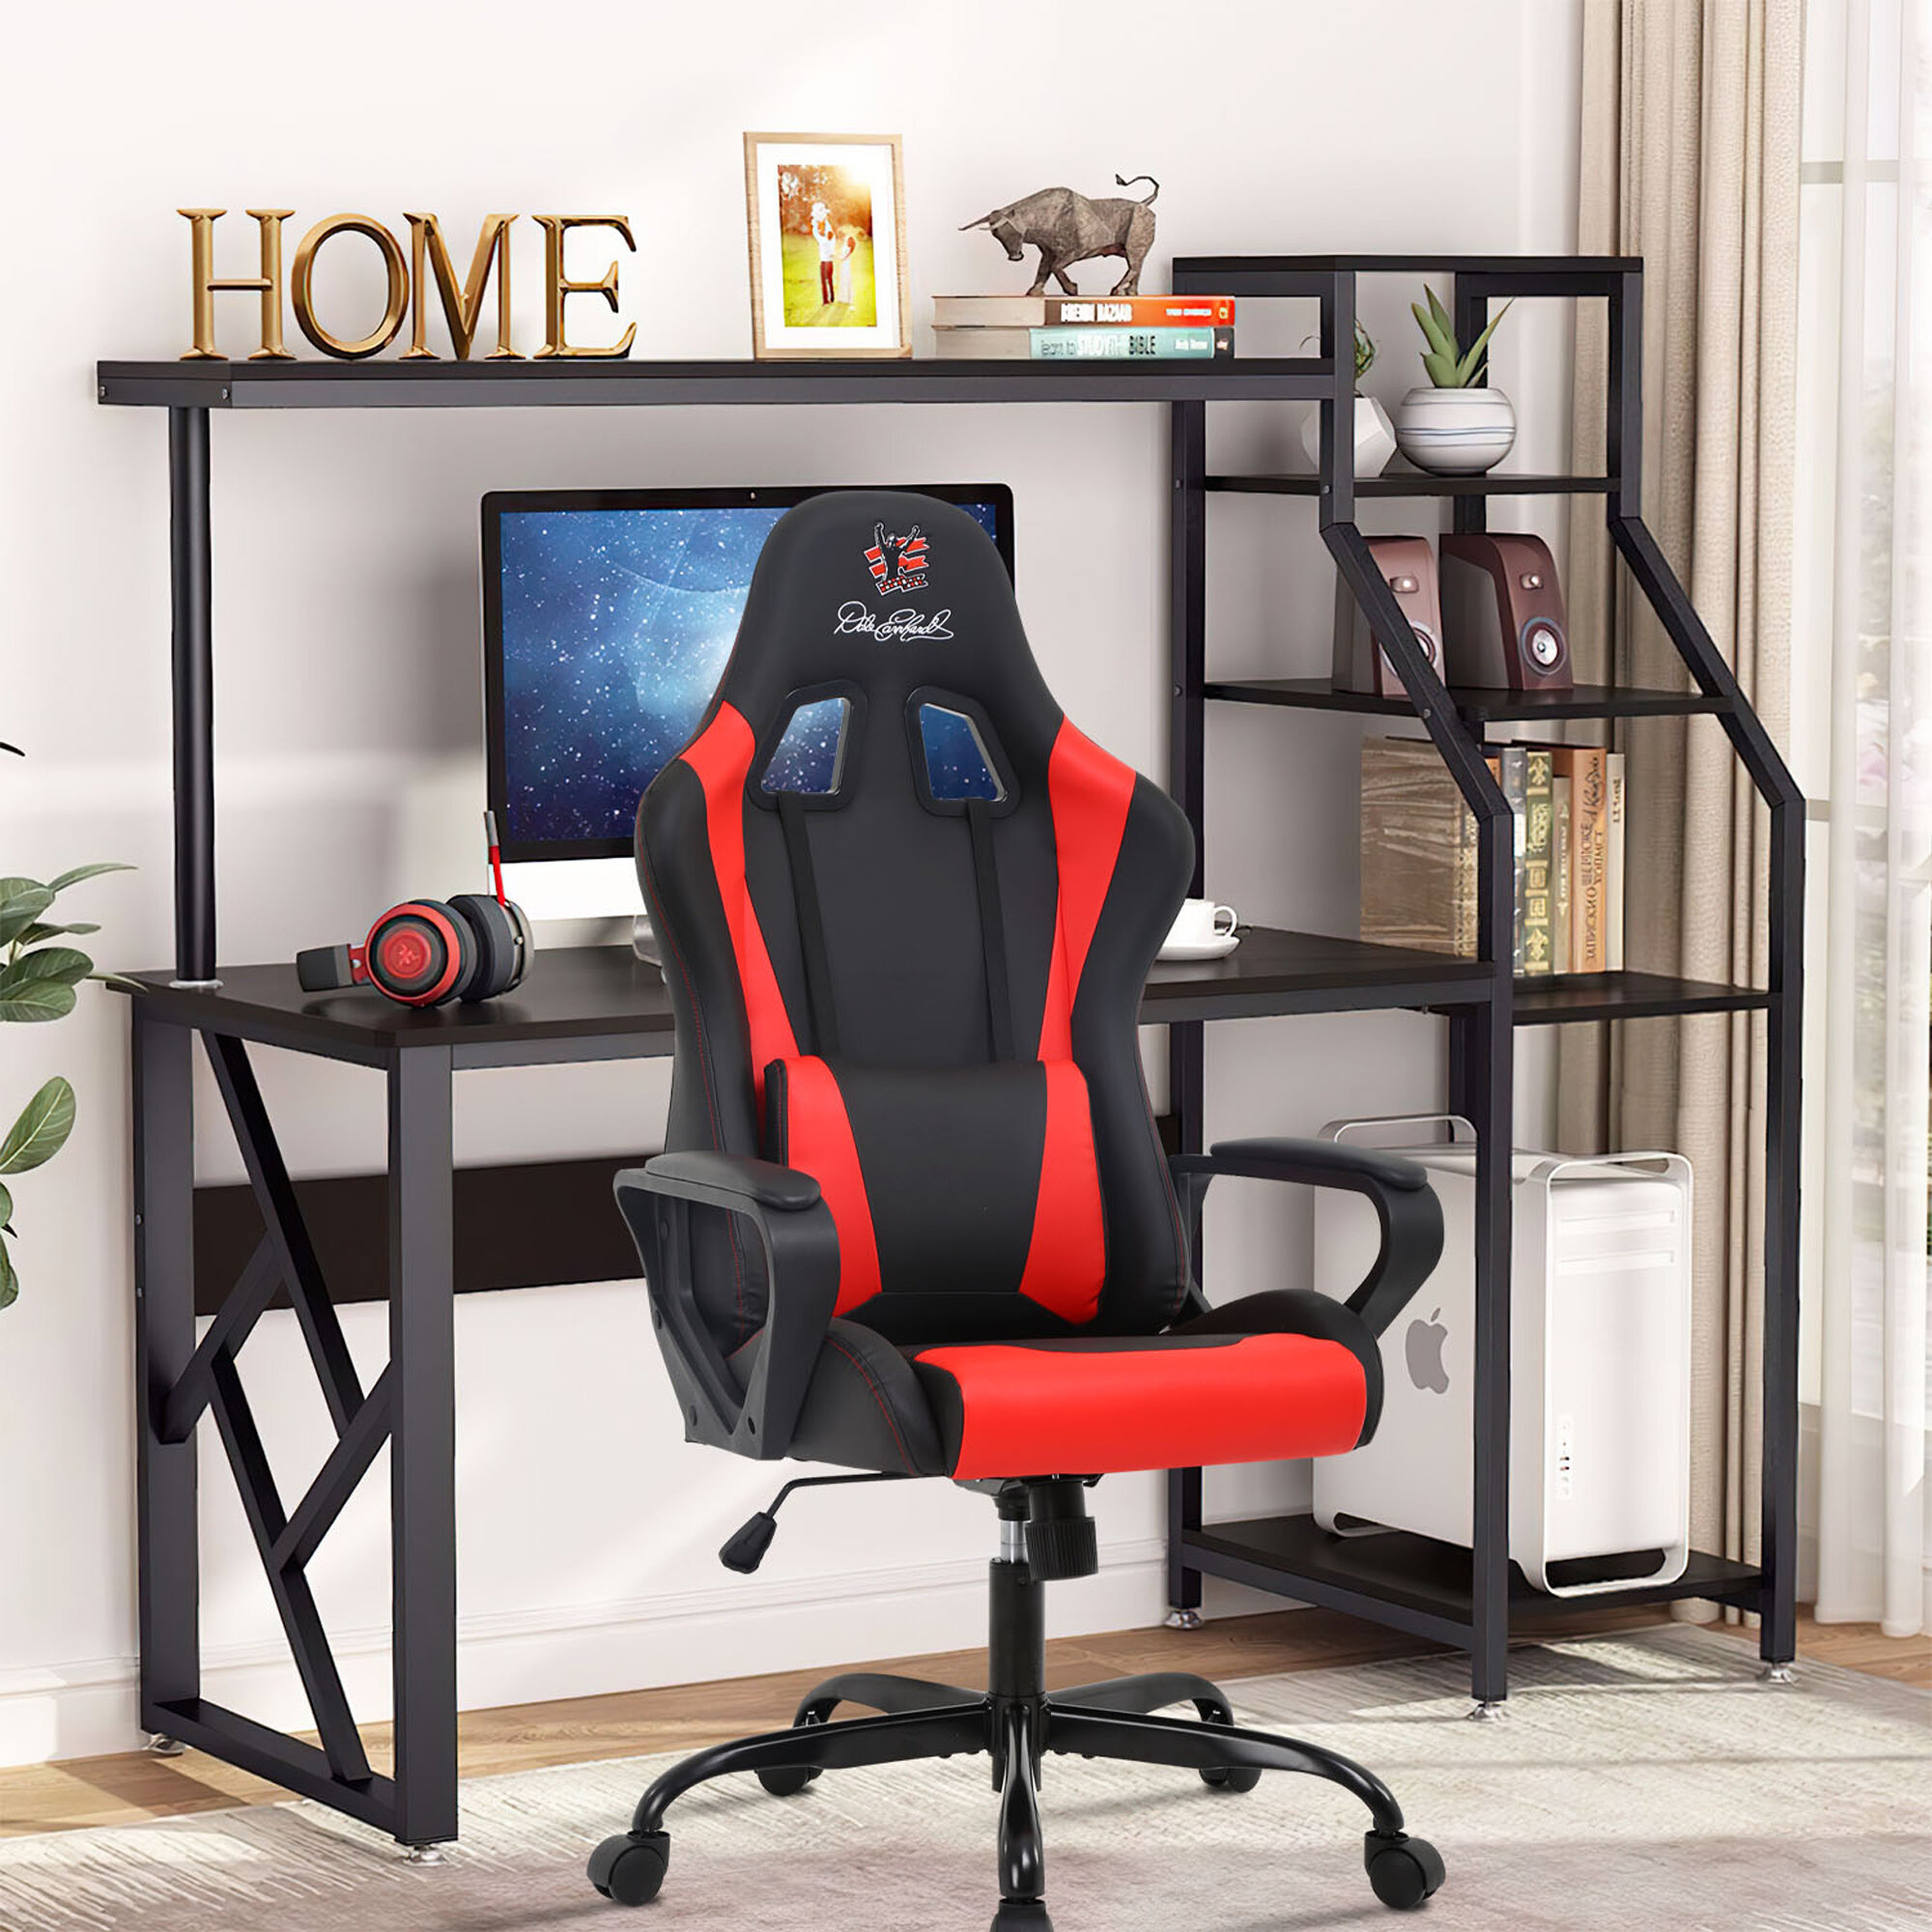 GAMING CHAIR RACING ERGONOMIC LEATHER HIGH BACK RECLINER OFFICE DESK SWIVEL SEAT 